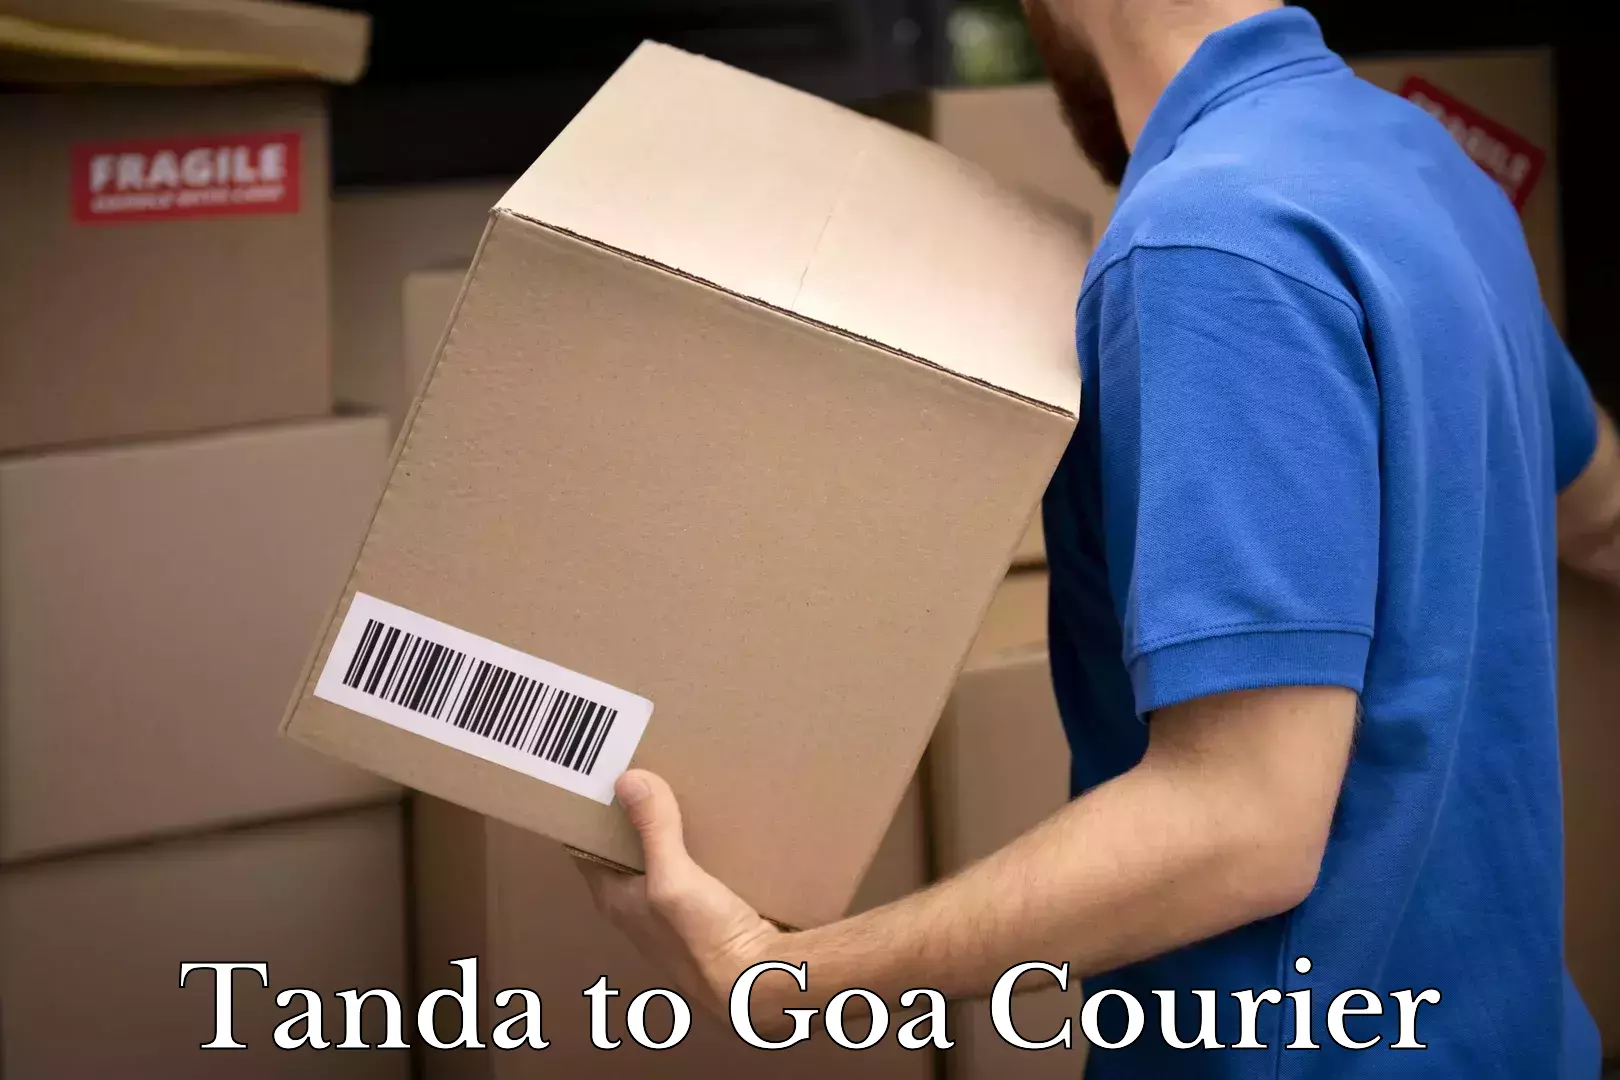 Multi-national courier services Tanda to Goa